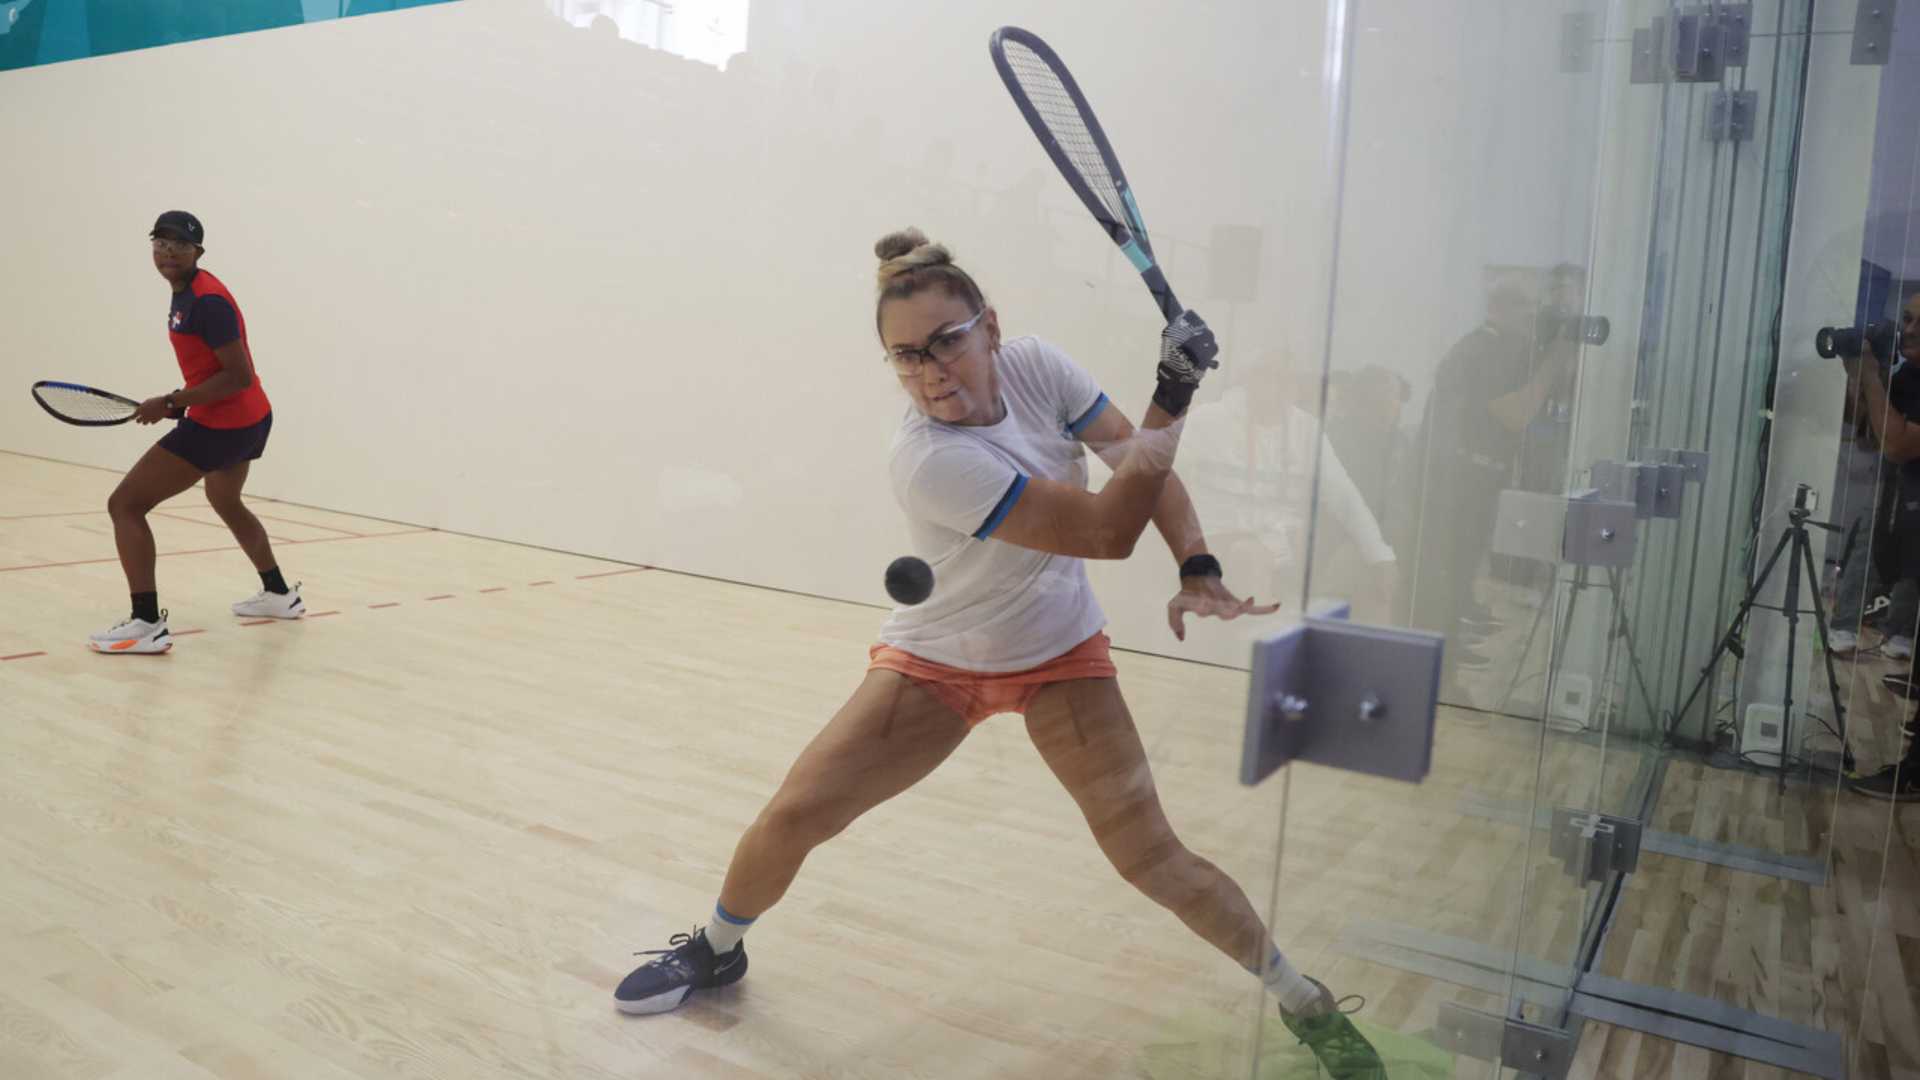 History repeats itself in racquetball: Mexico and Argentina compete for gold